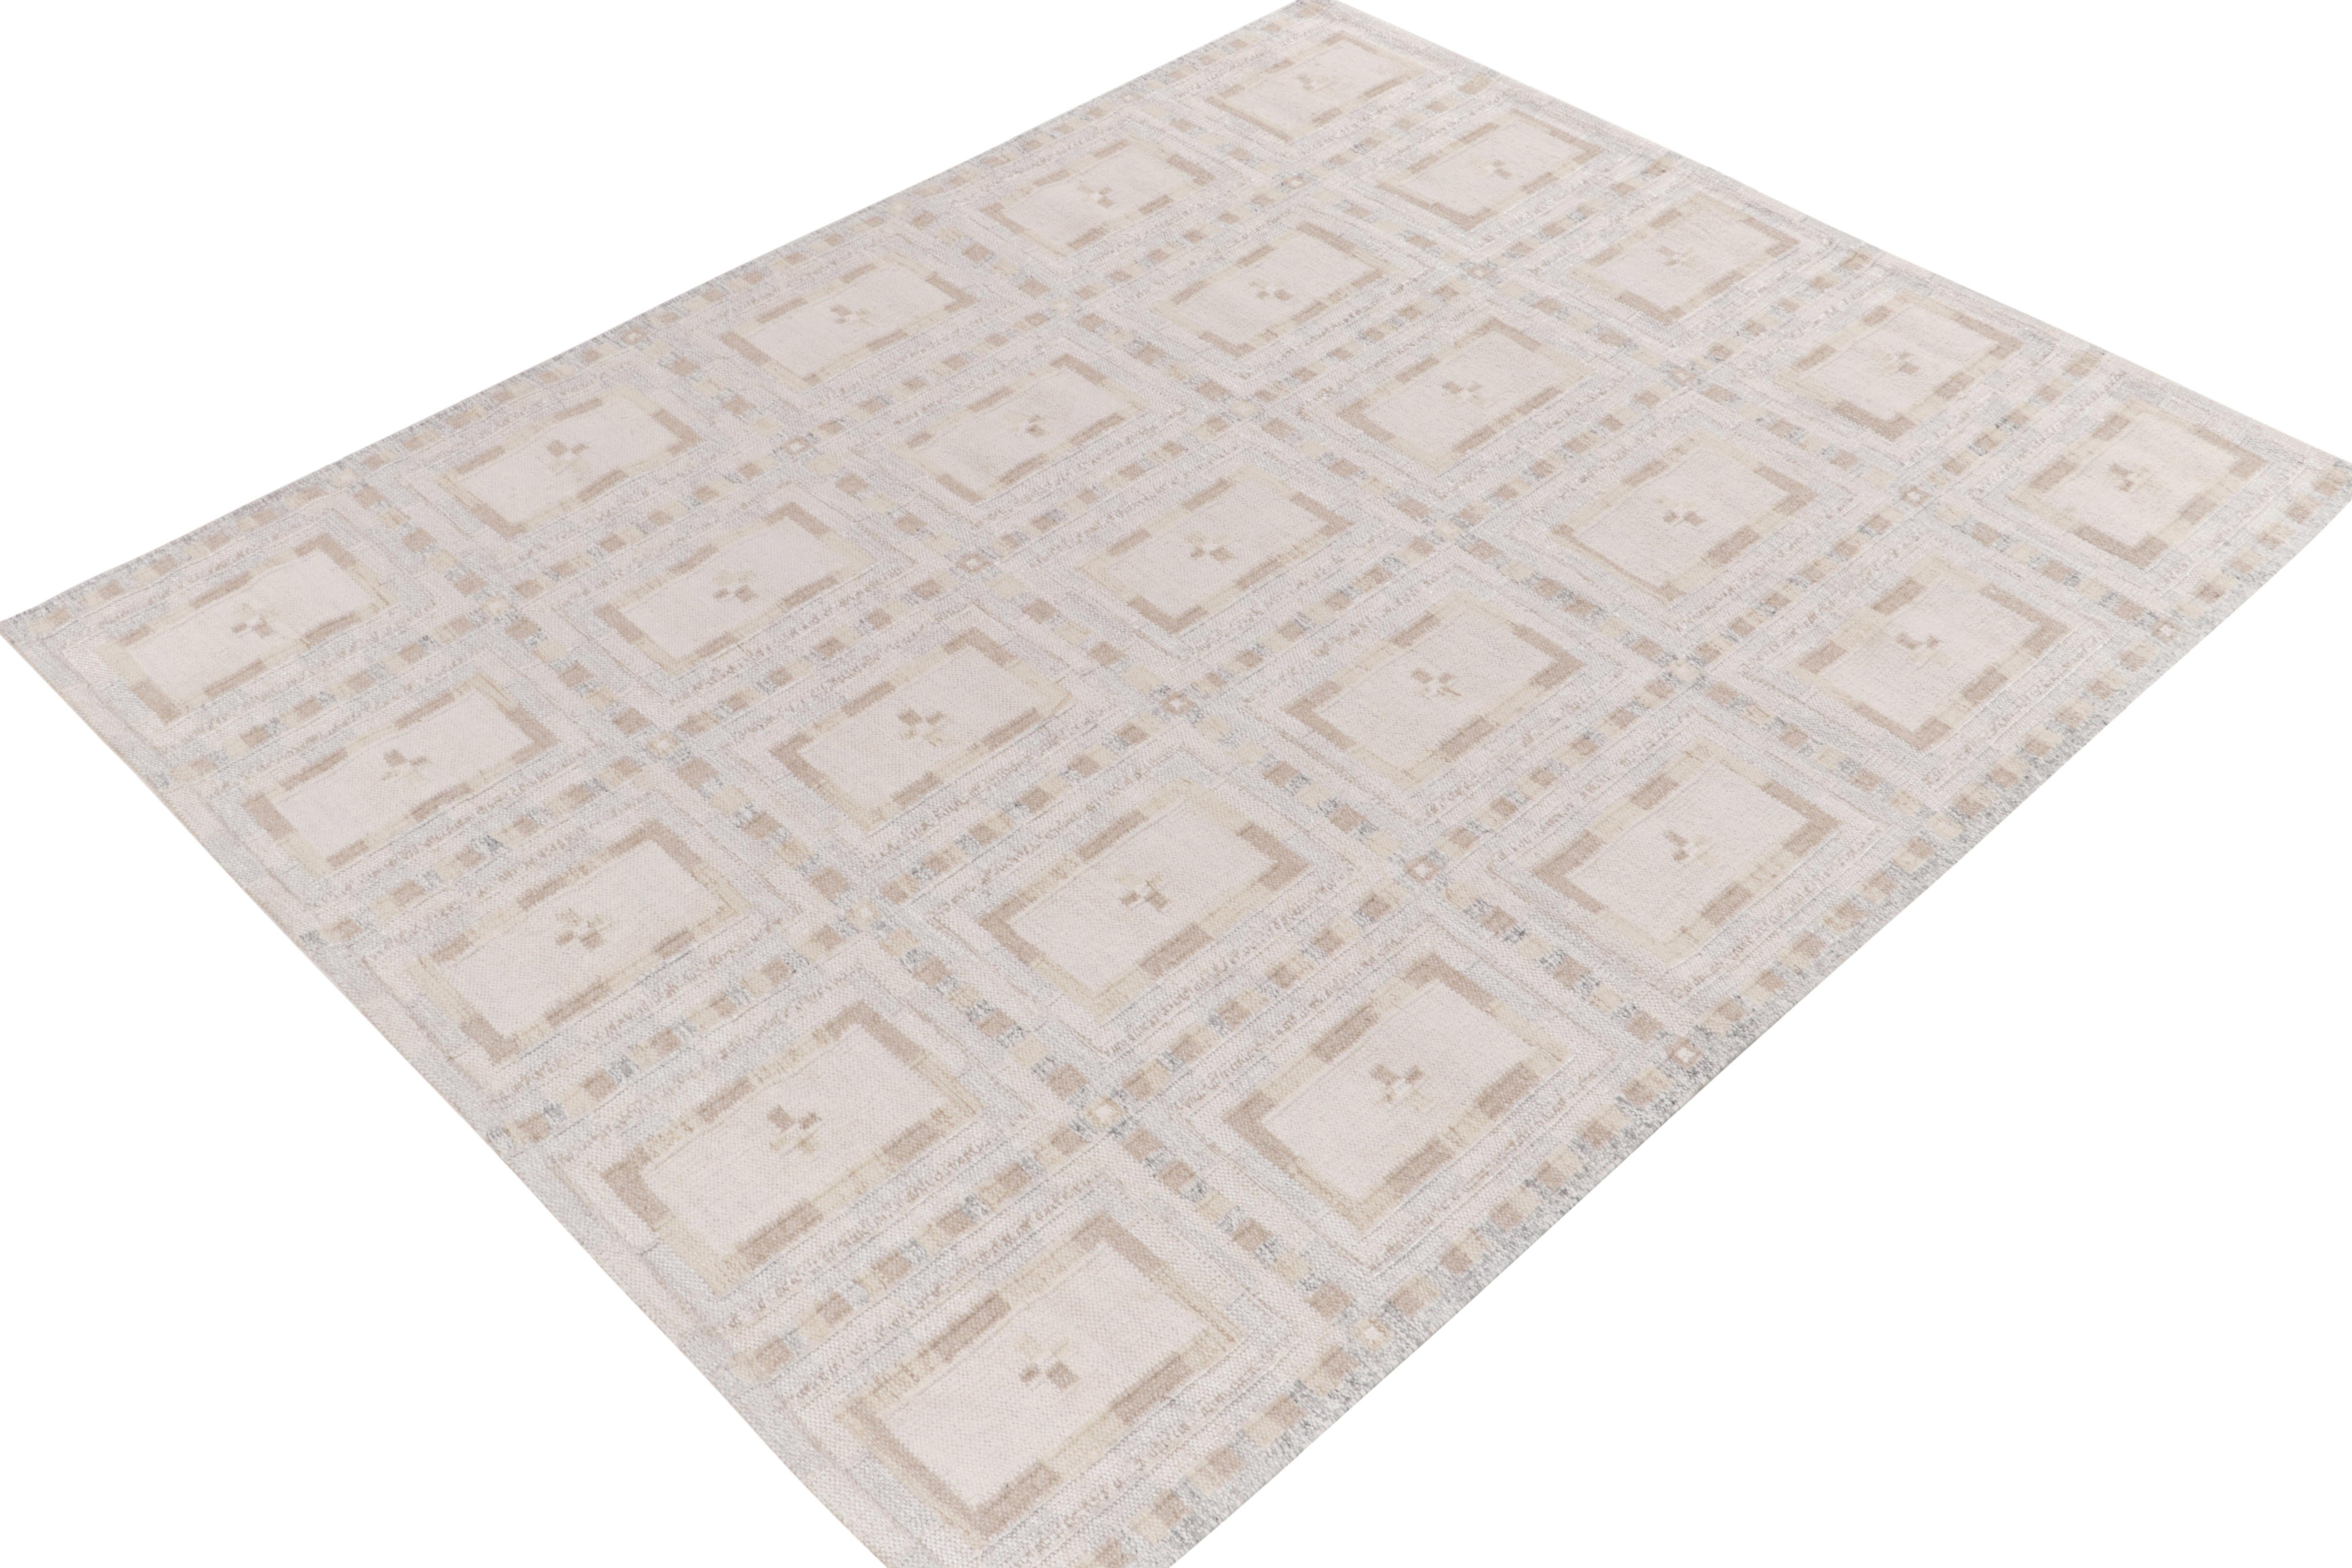 A 9x12 Swedish style kilim rug from our award-winning Scandinavian flat weave selections. The piece showcases a sophisticated play of beige & brown with gray blue for an intricate, yet cool accent to the white hues. Connoisseurs may note this